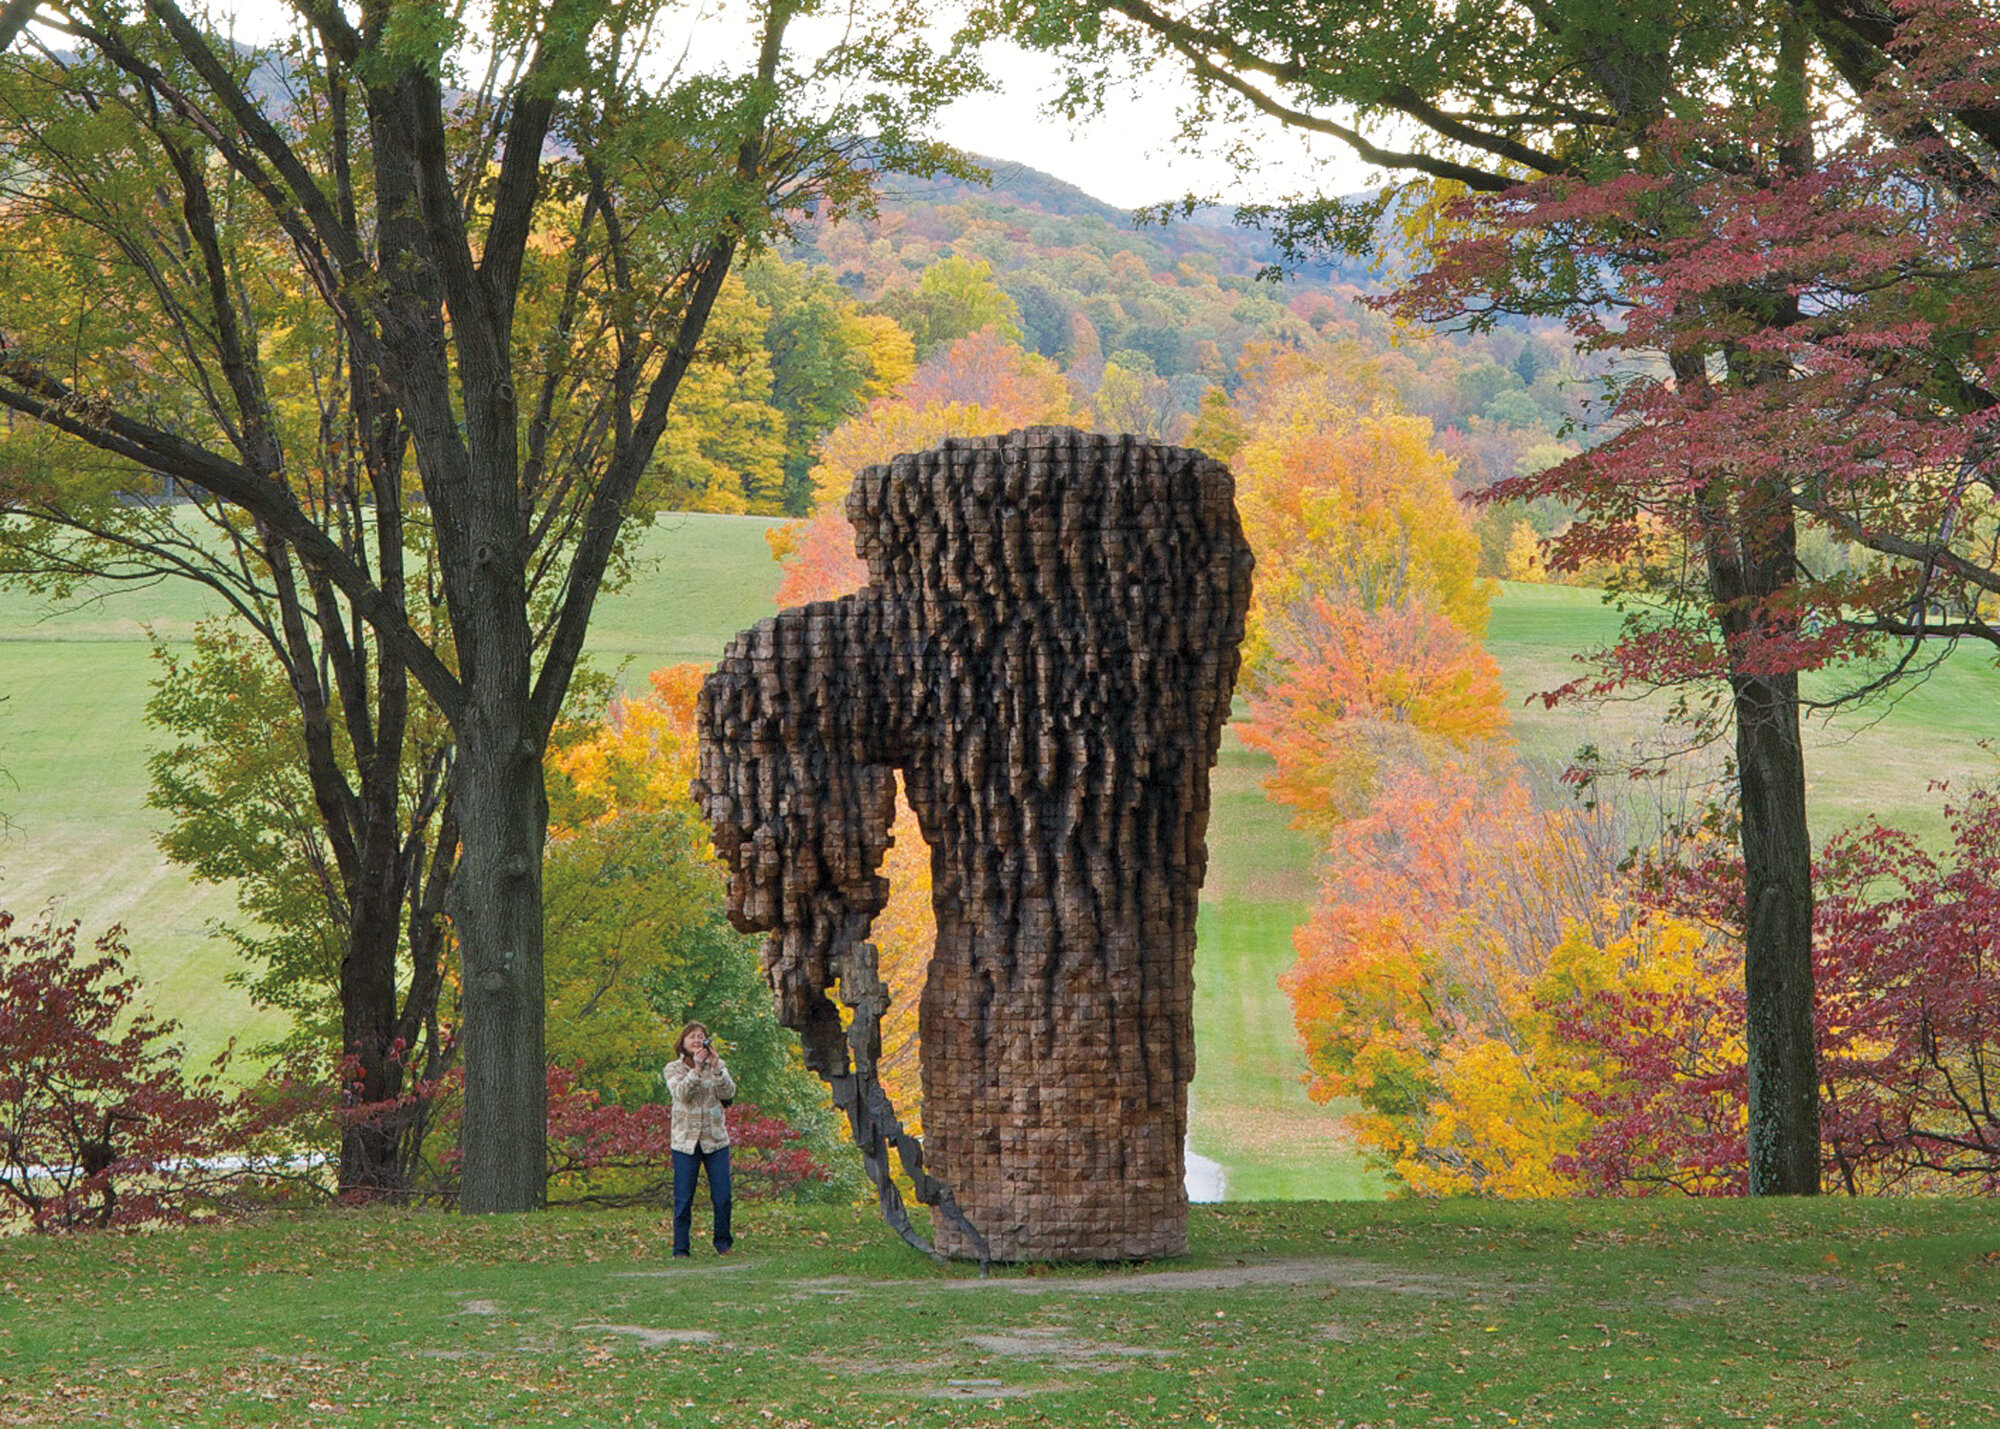       Luba , 2010 Cedar, graphite, and bronze 212 x 139 x 88 in.    MORE IMAGES   Storm King Art Center  